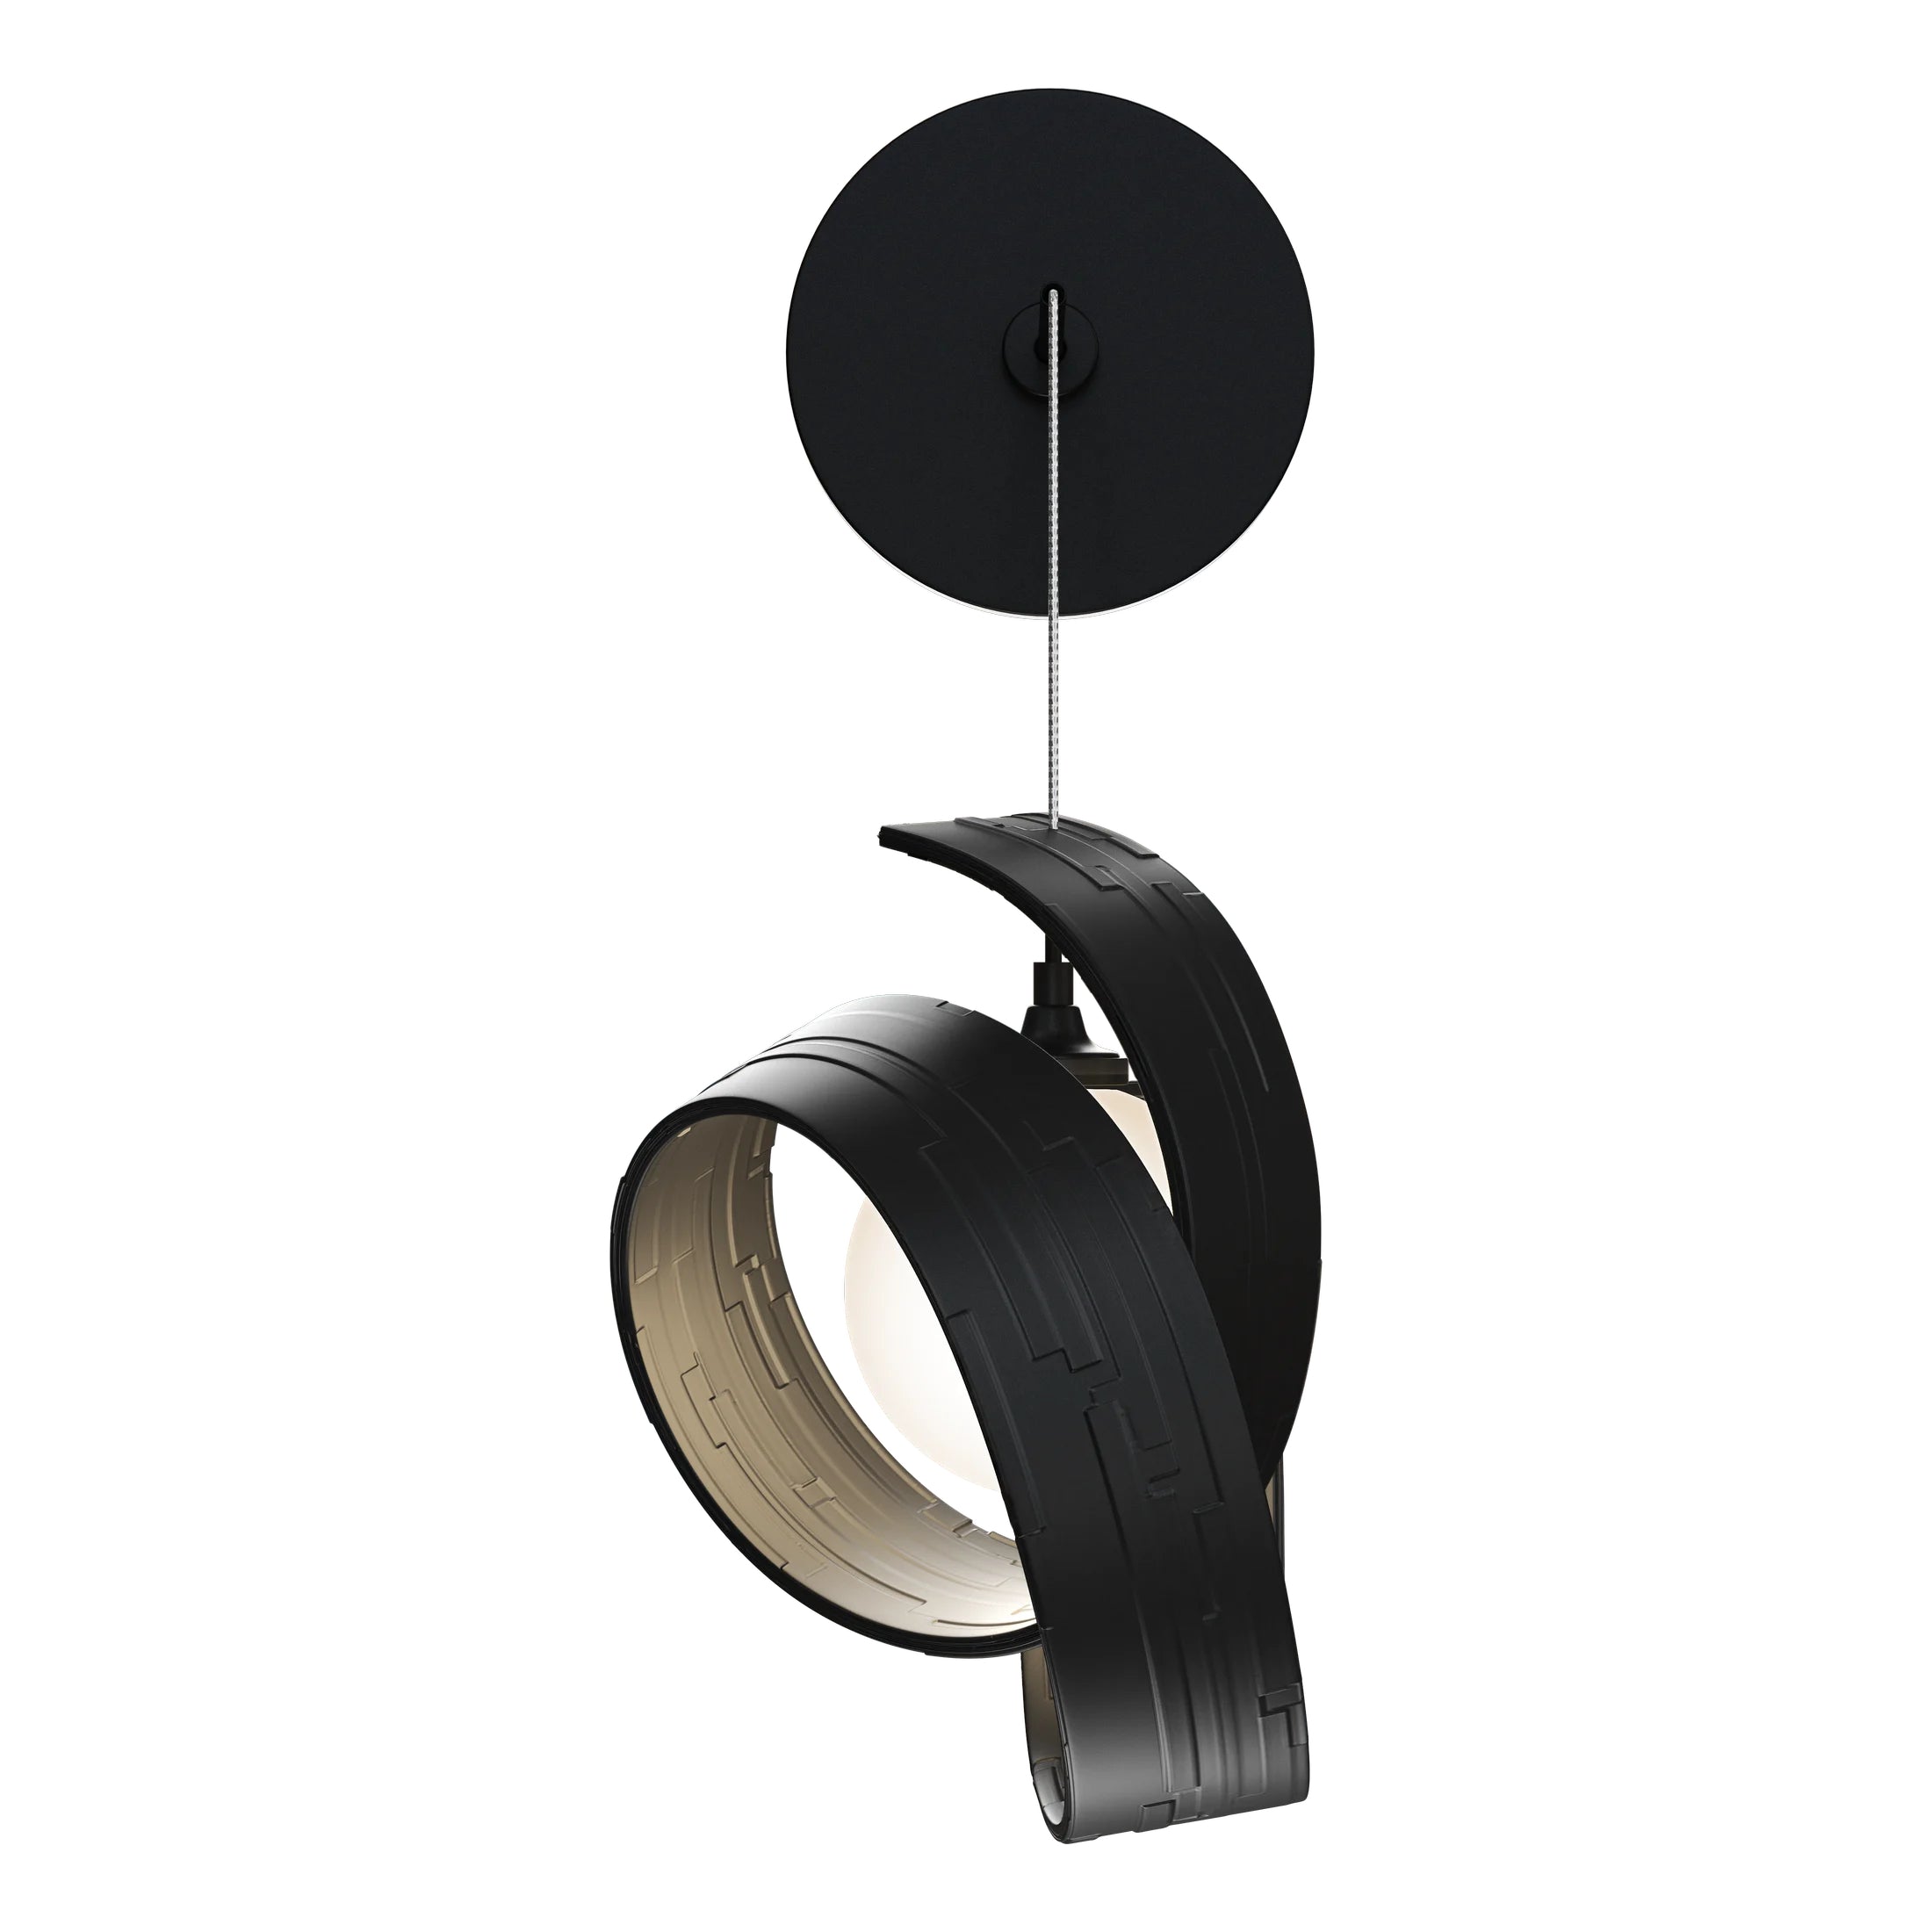 Riza 8 in. Armed Sconce